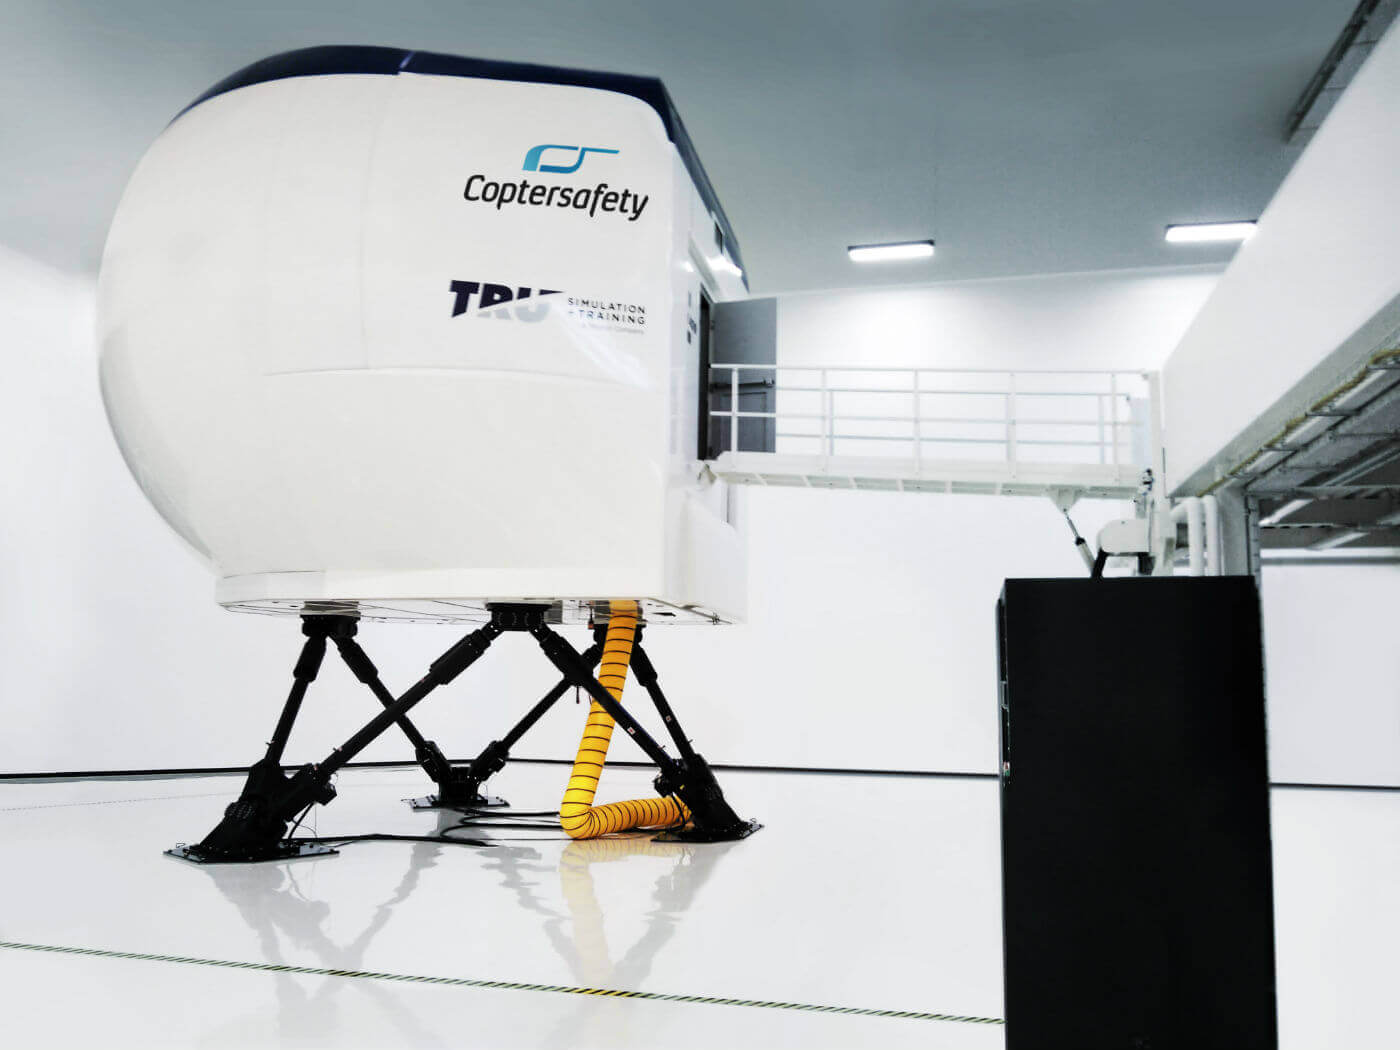 These five high-fidelity simulators will represent Airbus Helicopters H125 and H145, Leonardo-Finmeccanica (formerly AgustaWestland) AW139, AW169 and AW189 and all will be dually European Aviation Safety Agency and Federal Aviation Administration certified. TRU Photo